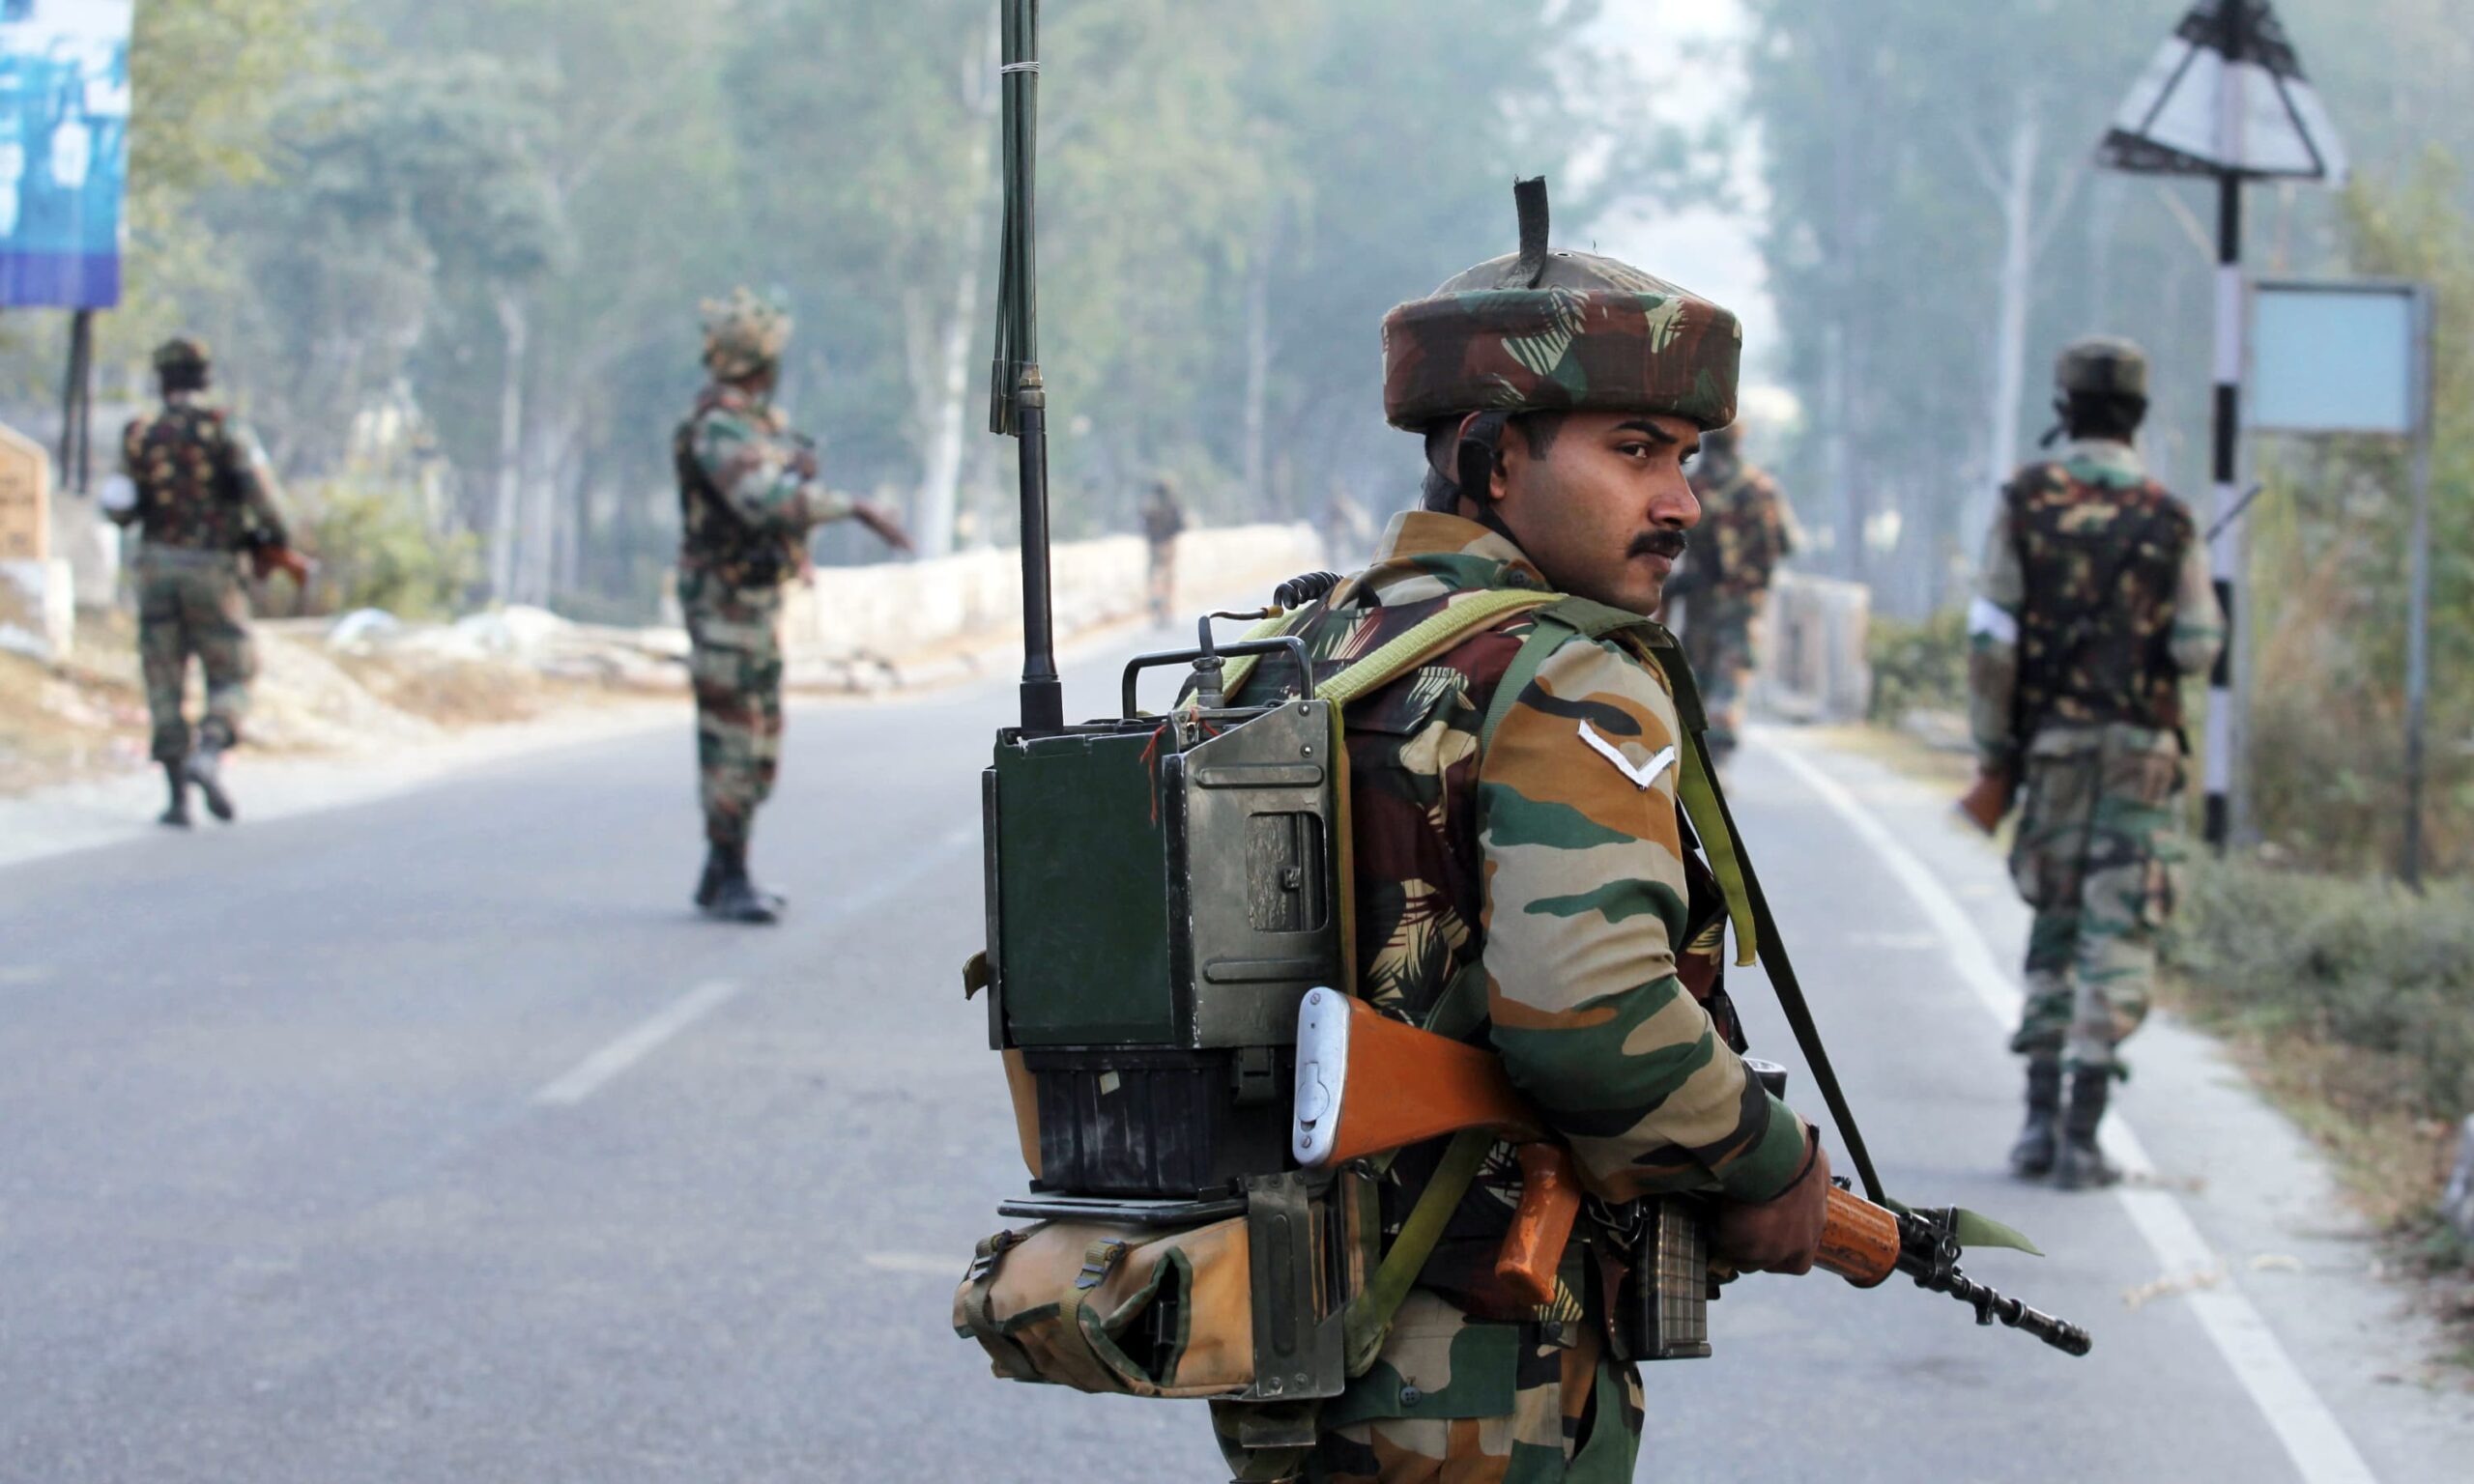 J&K: Top Commander and two other terrorists of LeT killed in an encounter with the Security Forces